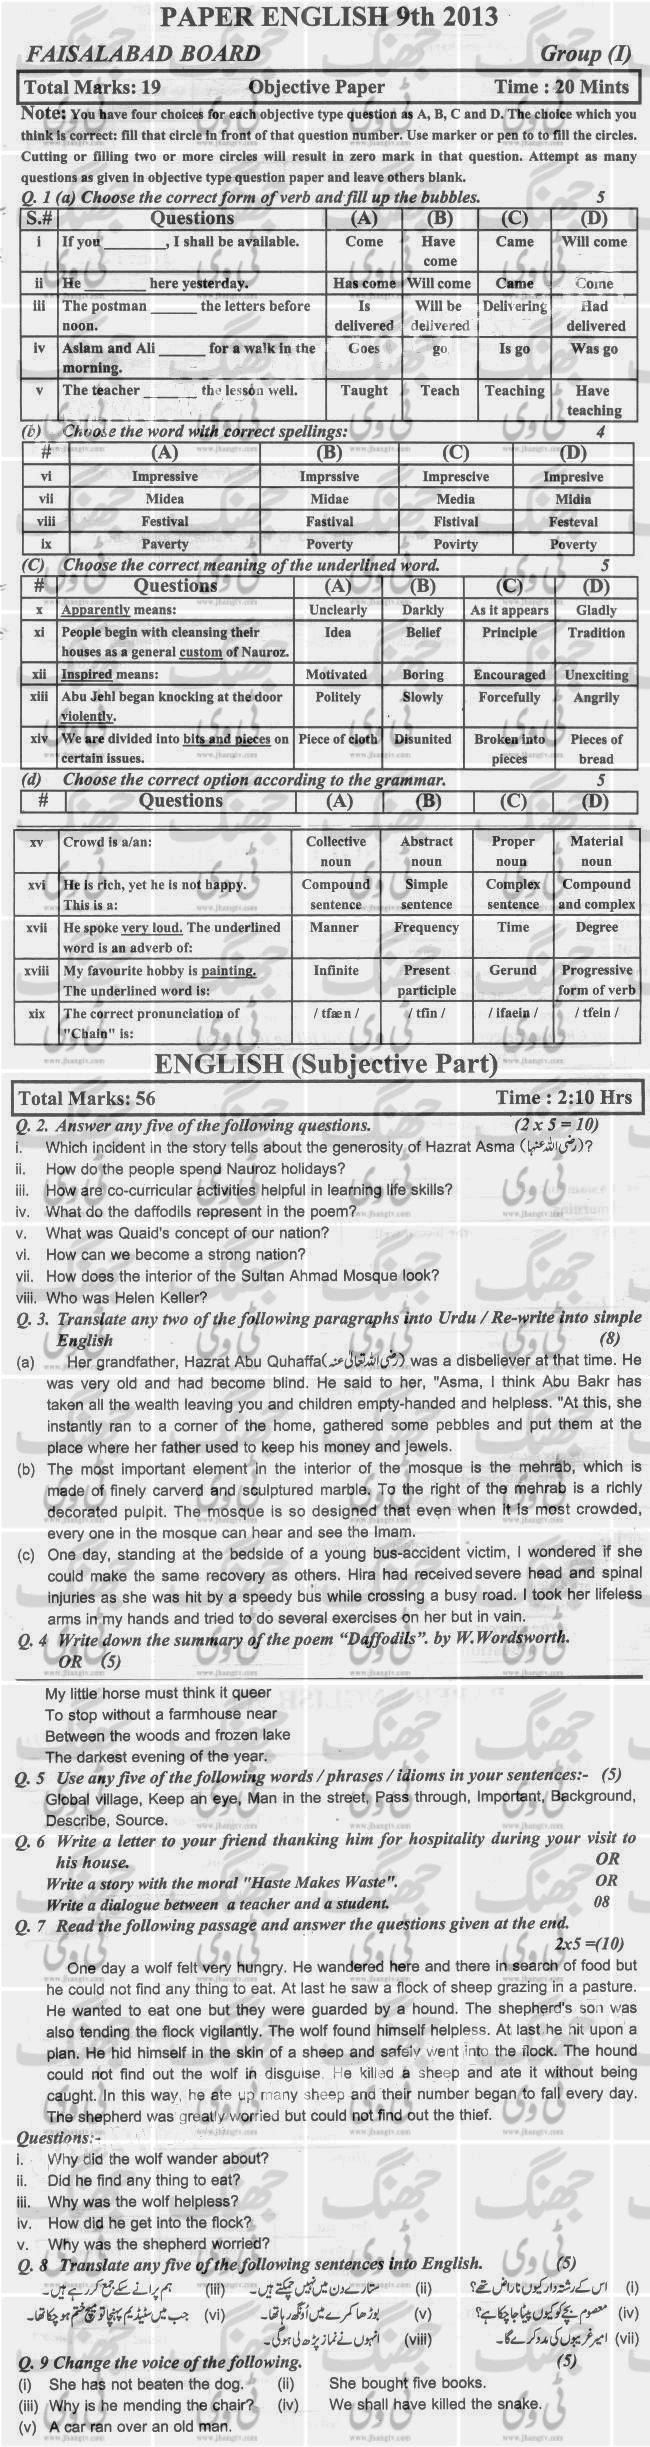 Past-Papers-2013-Faisalabad-Board-9th-Class-English-Group-1 copy